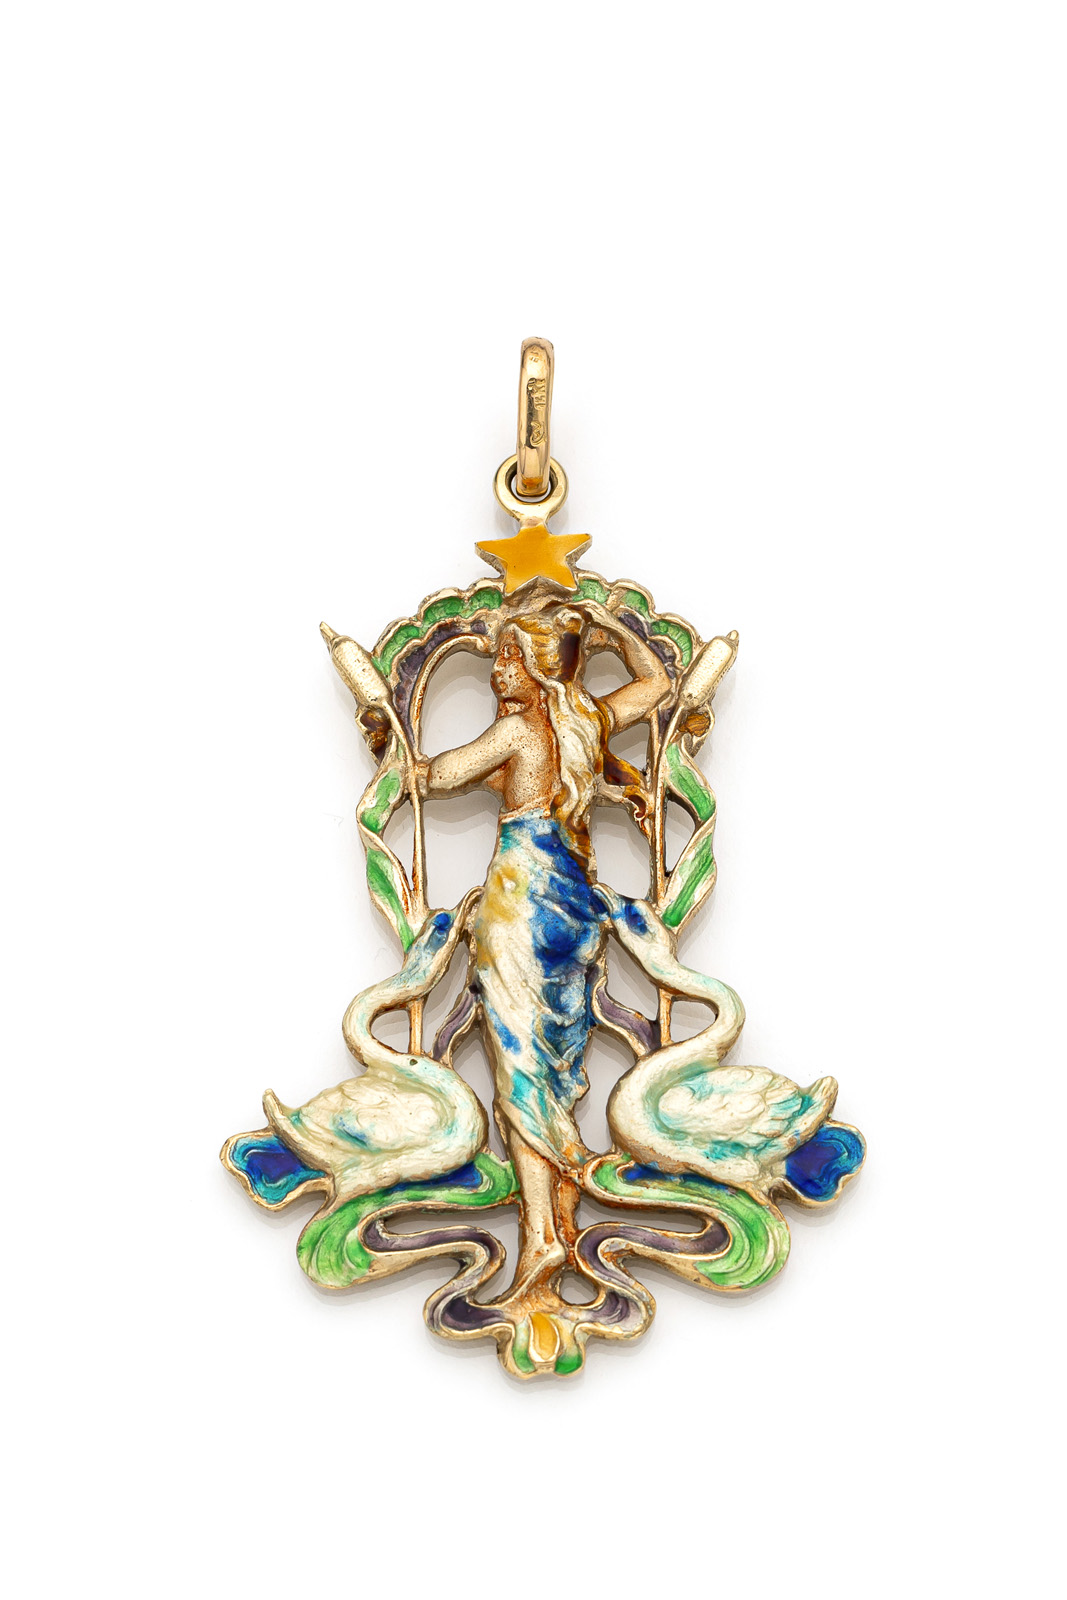 <b>AN ART NOUVEAU GOLD AND ENAMEL PENDANT WITH A YOUNG WOMAN AND TWO SWANS</b>